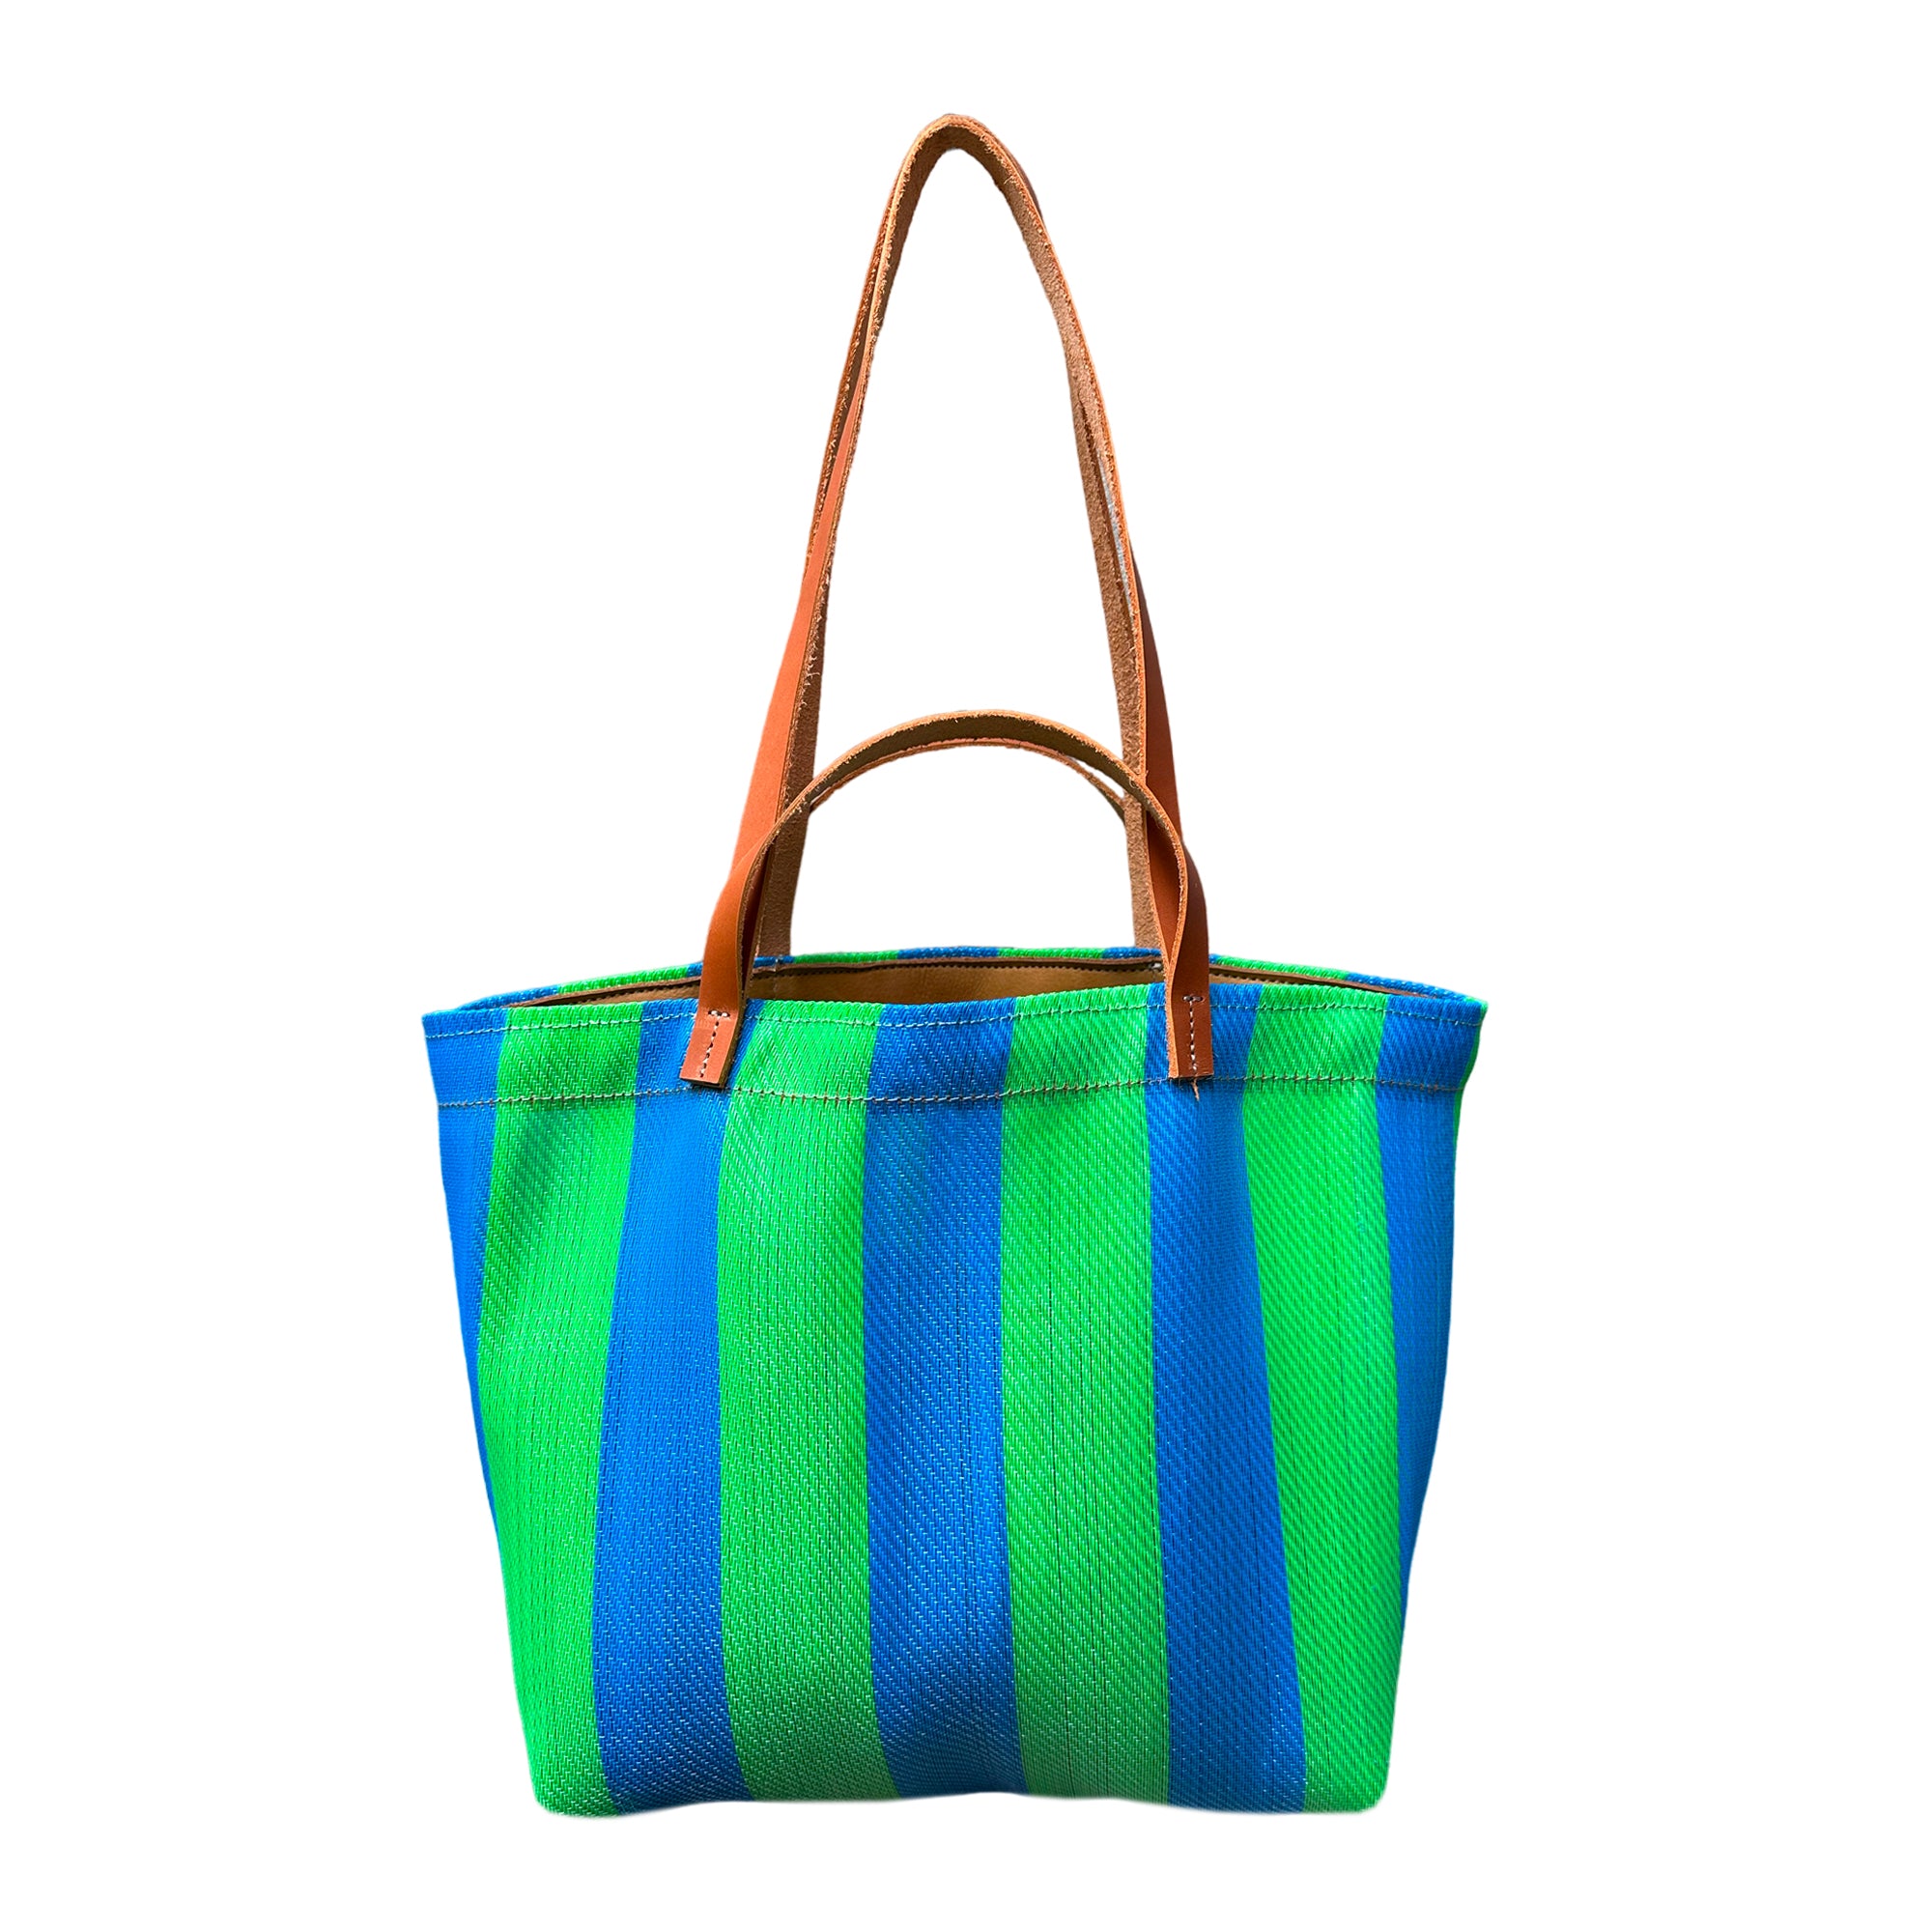 Mini Recycled Plastic Market Tote Bag in Green and Blue